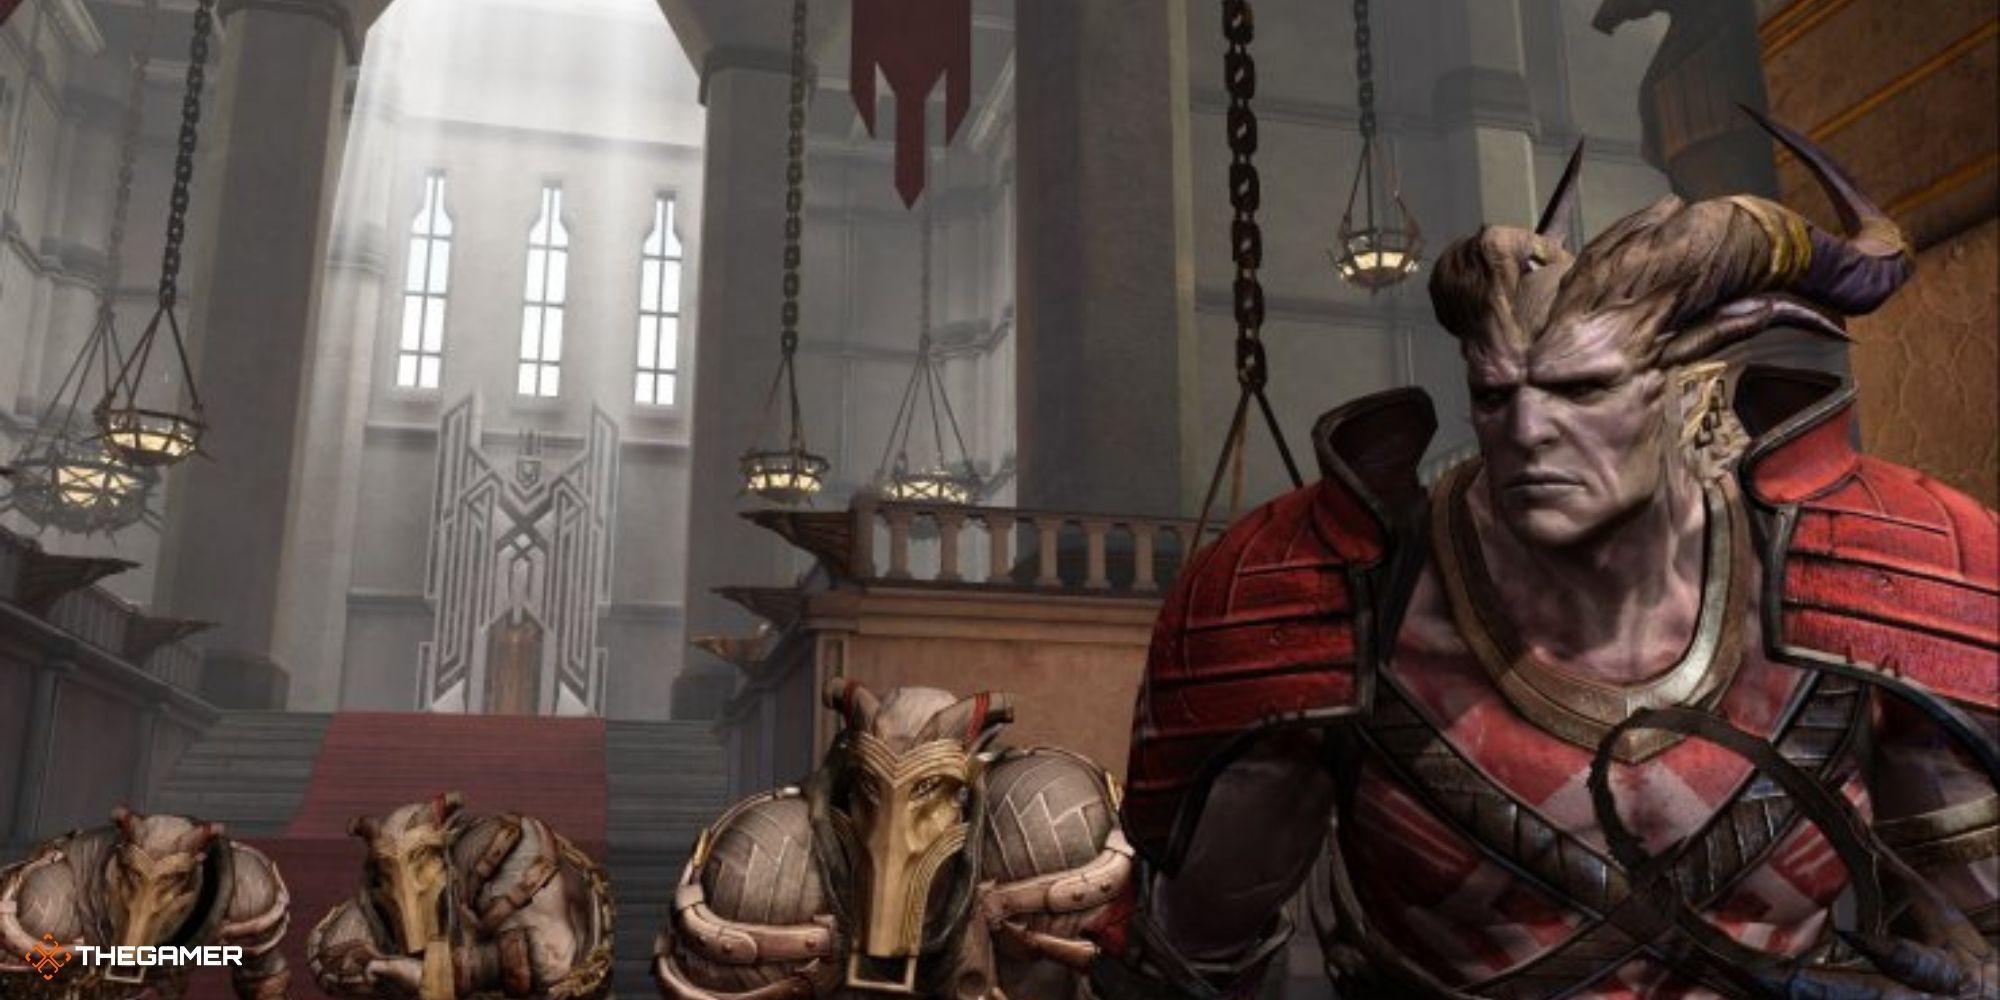 how to customize hawke in dragon age 2 on pc